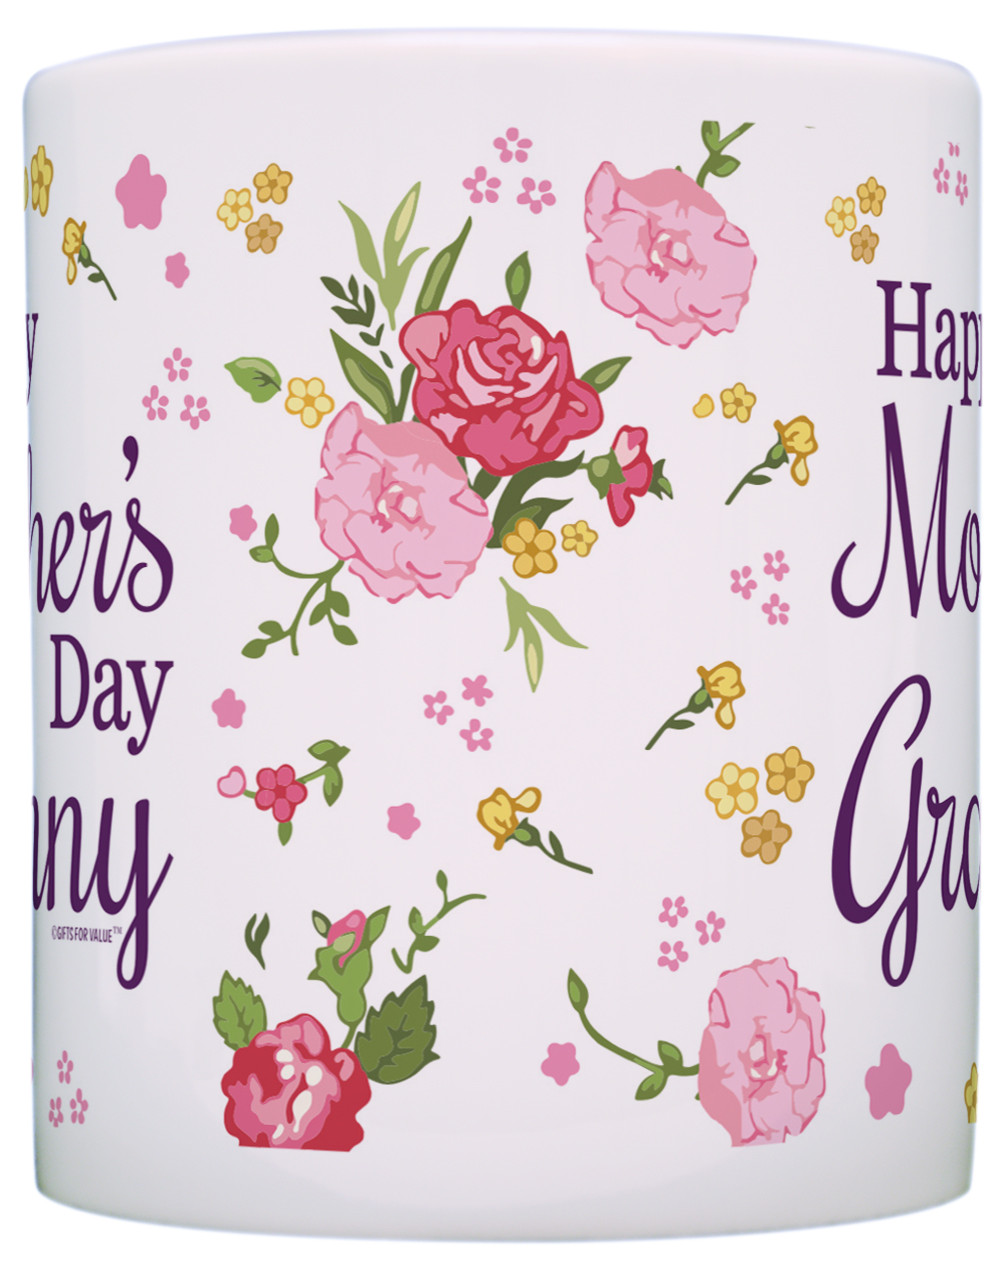 Gifts For Mom On Mother's Day
 Mothers Day Gifts Mother s Day Granny Gift for Grandma Mom